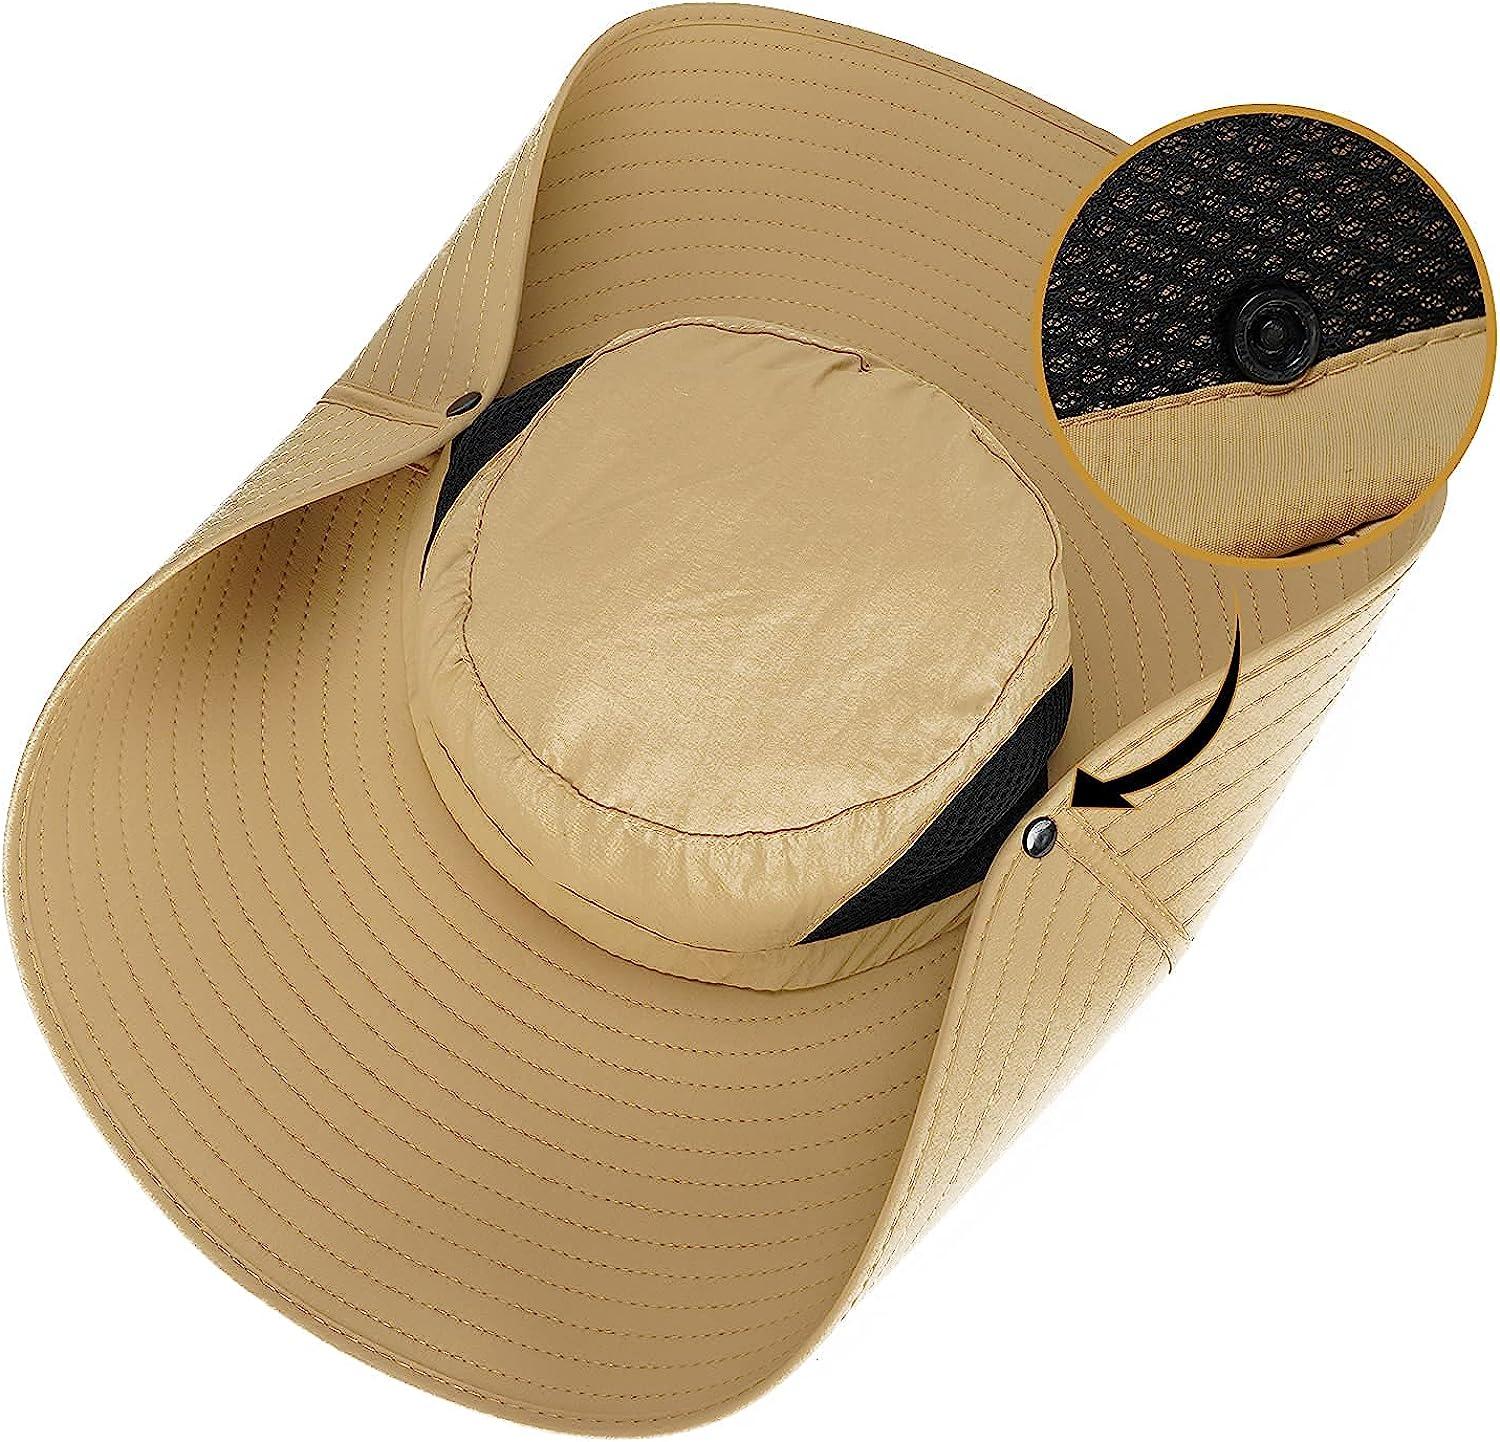 Super Wide Brim Sun Hat for Men and Women - UPF 50+ Waterproof Bucket Hat  for Fishing, Hiking, Camping